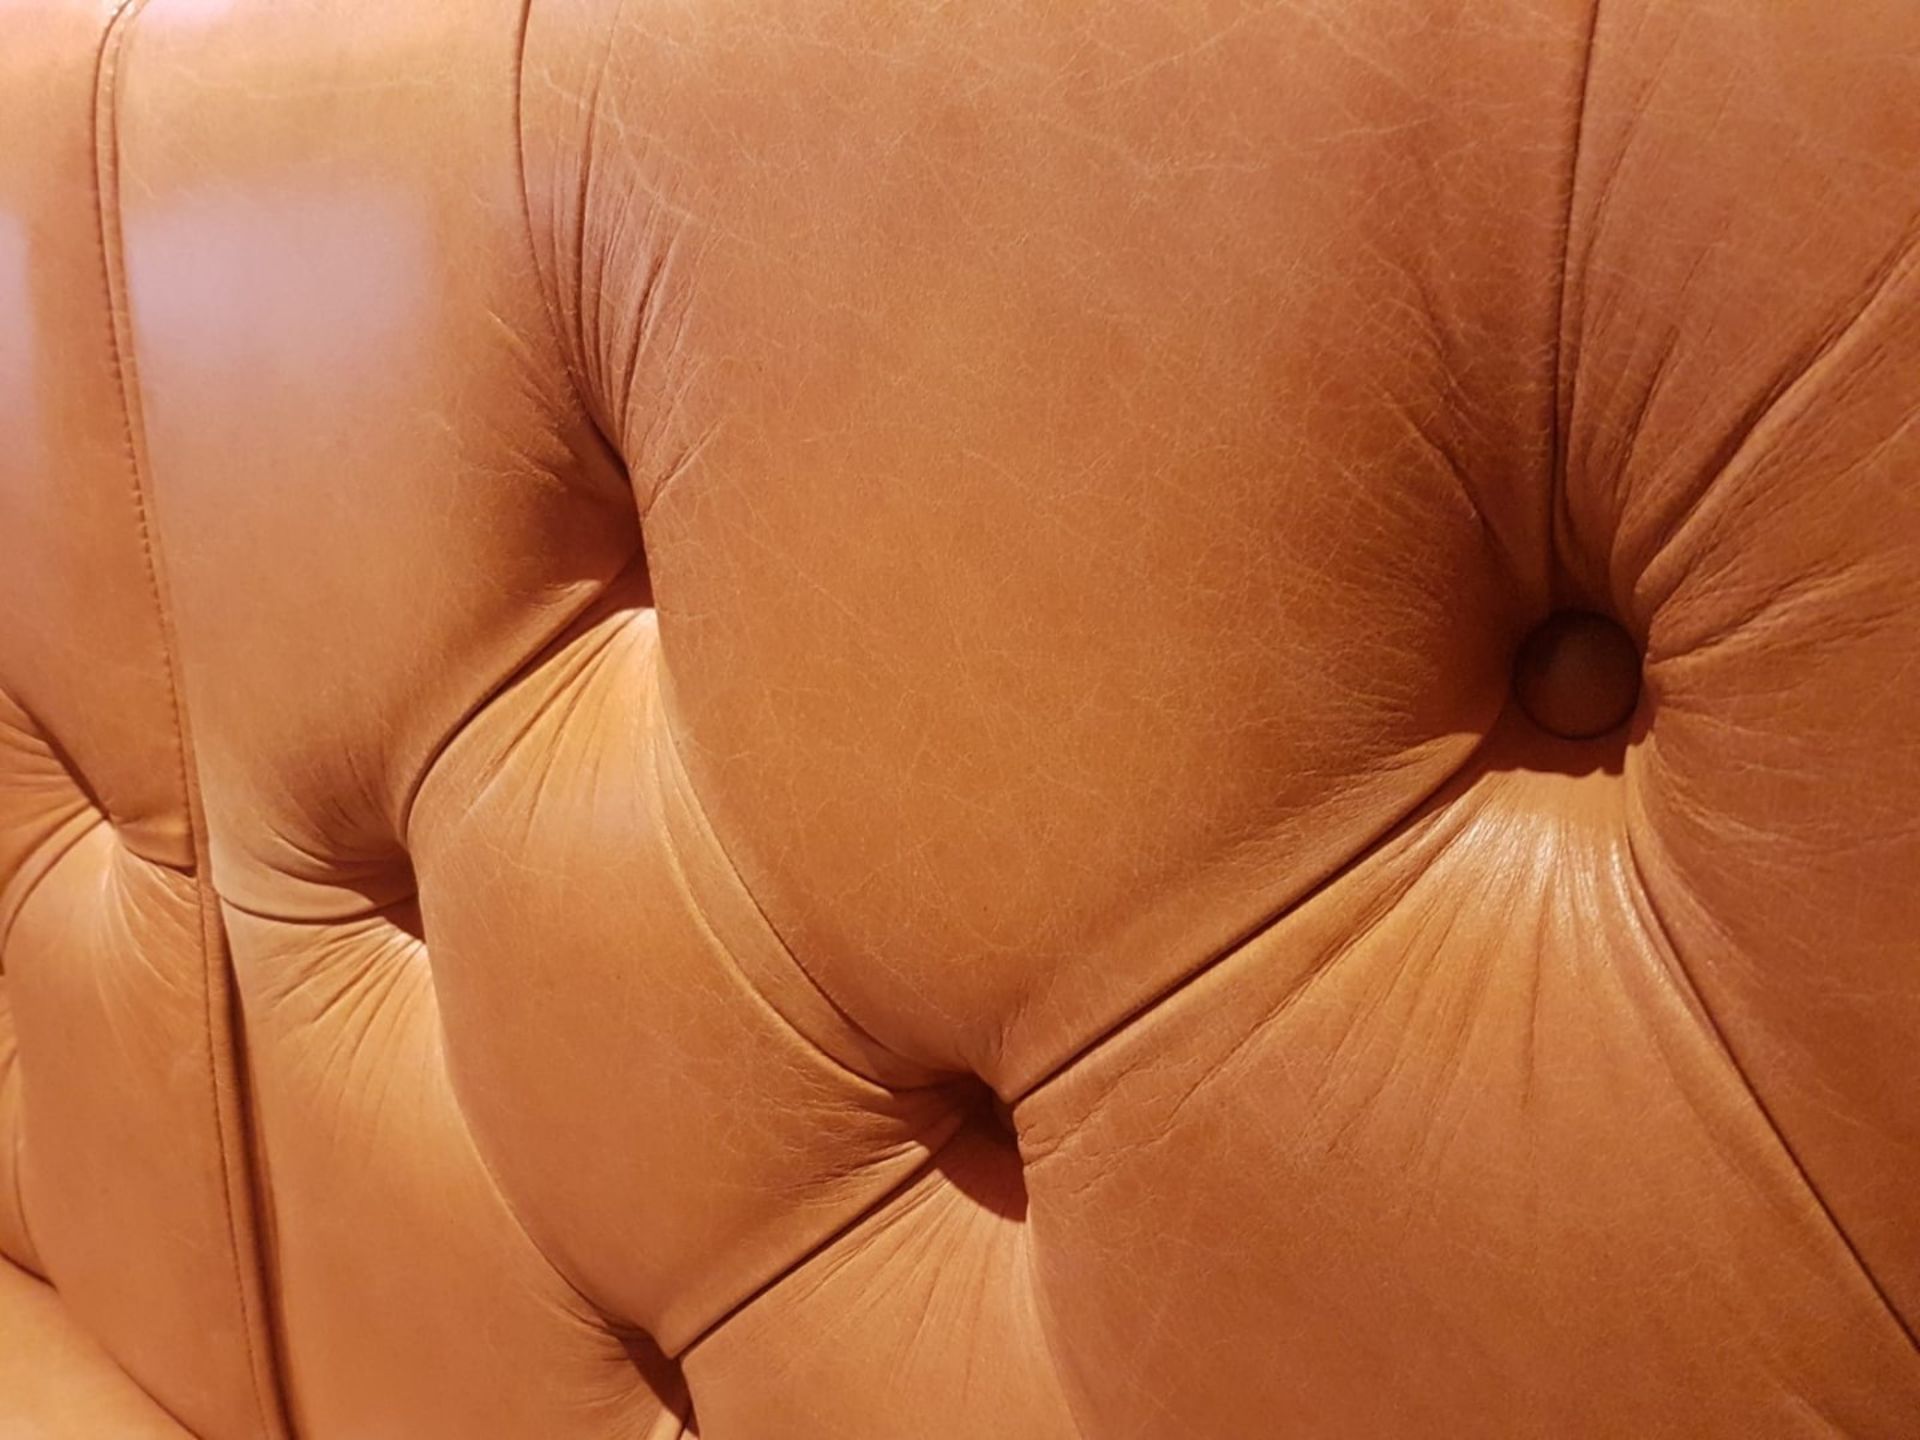 1 x Contemporary Seating Booth Section Upholstered In A Tan Coloured Leather - Image 3 of 9